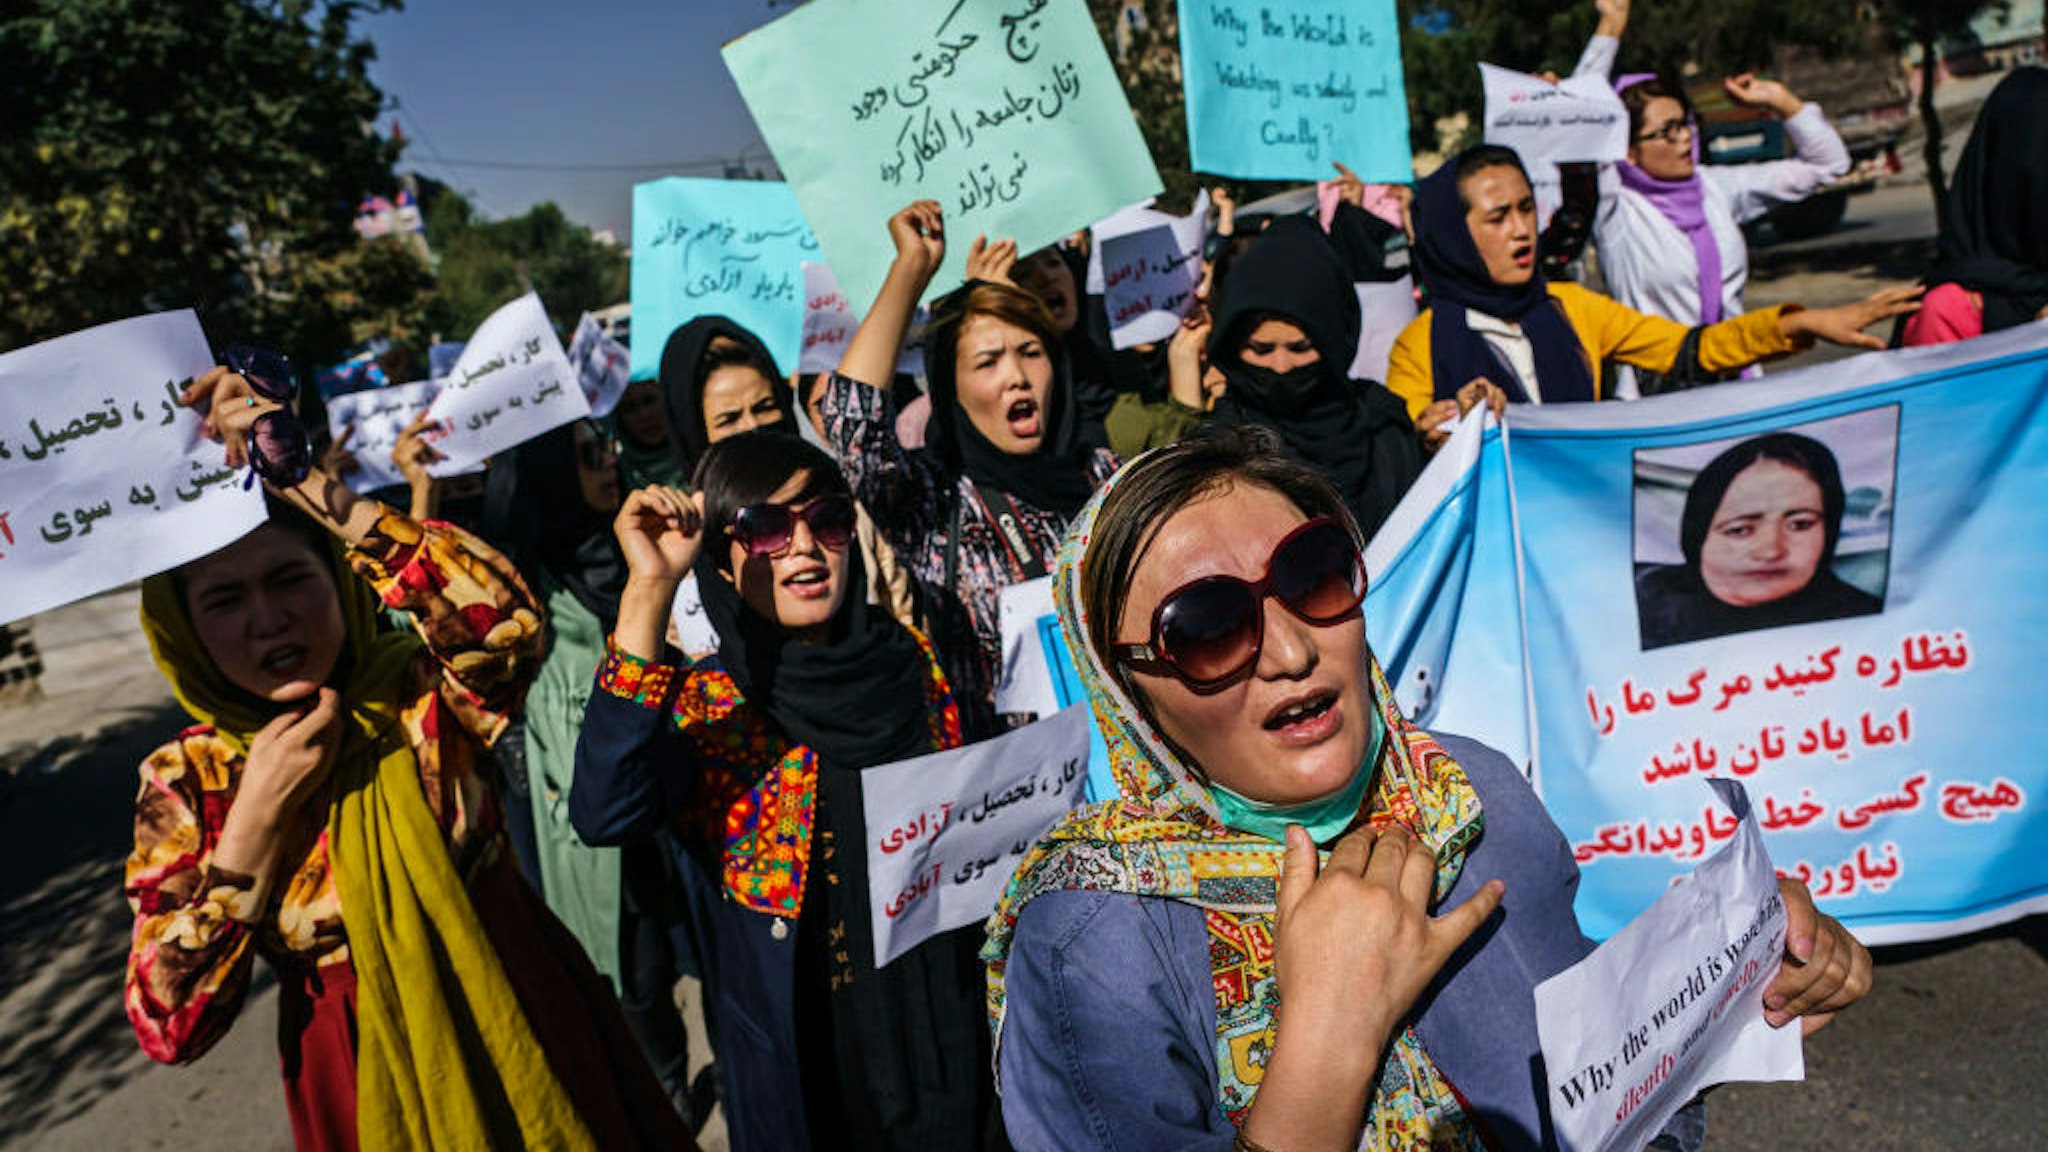 KABUL, AFGHANISTAN -- SEPTEMBER 8, 2021: Protesters march through the Dashti-E-Barchi neighborhood, a day after the Taliban announced their new all-male interim government with a no representation for women and ethnic minority groups, in Kabul, Afghanistan, Wednesday, Sept. 8, 2021. (MARCUS YAM / LOS ANGELES TIMES)